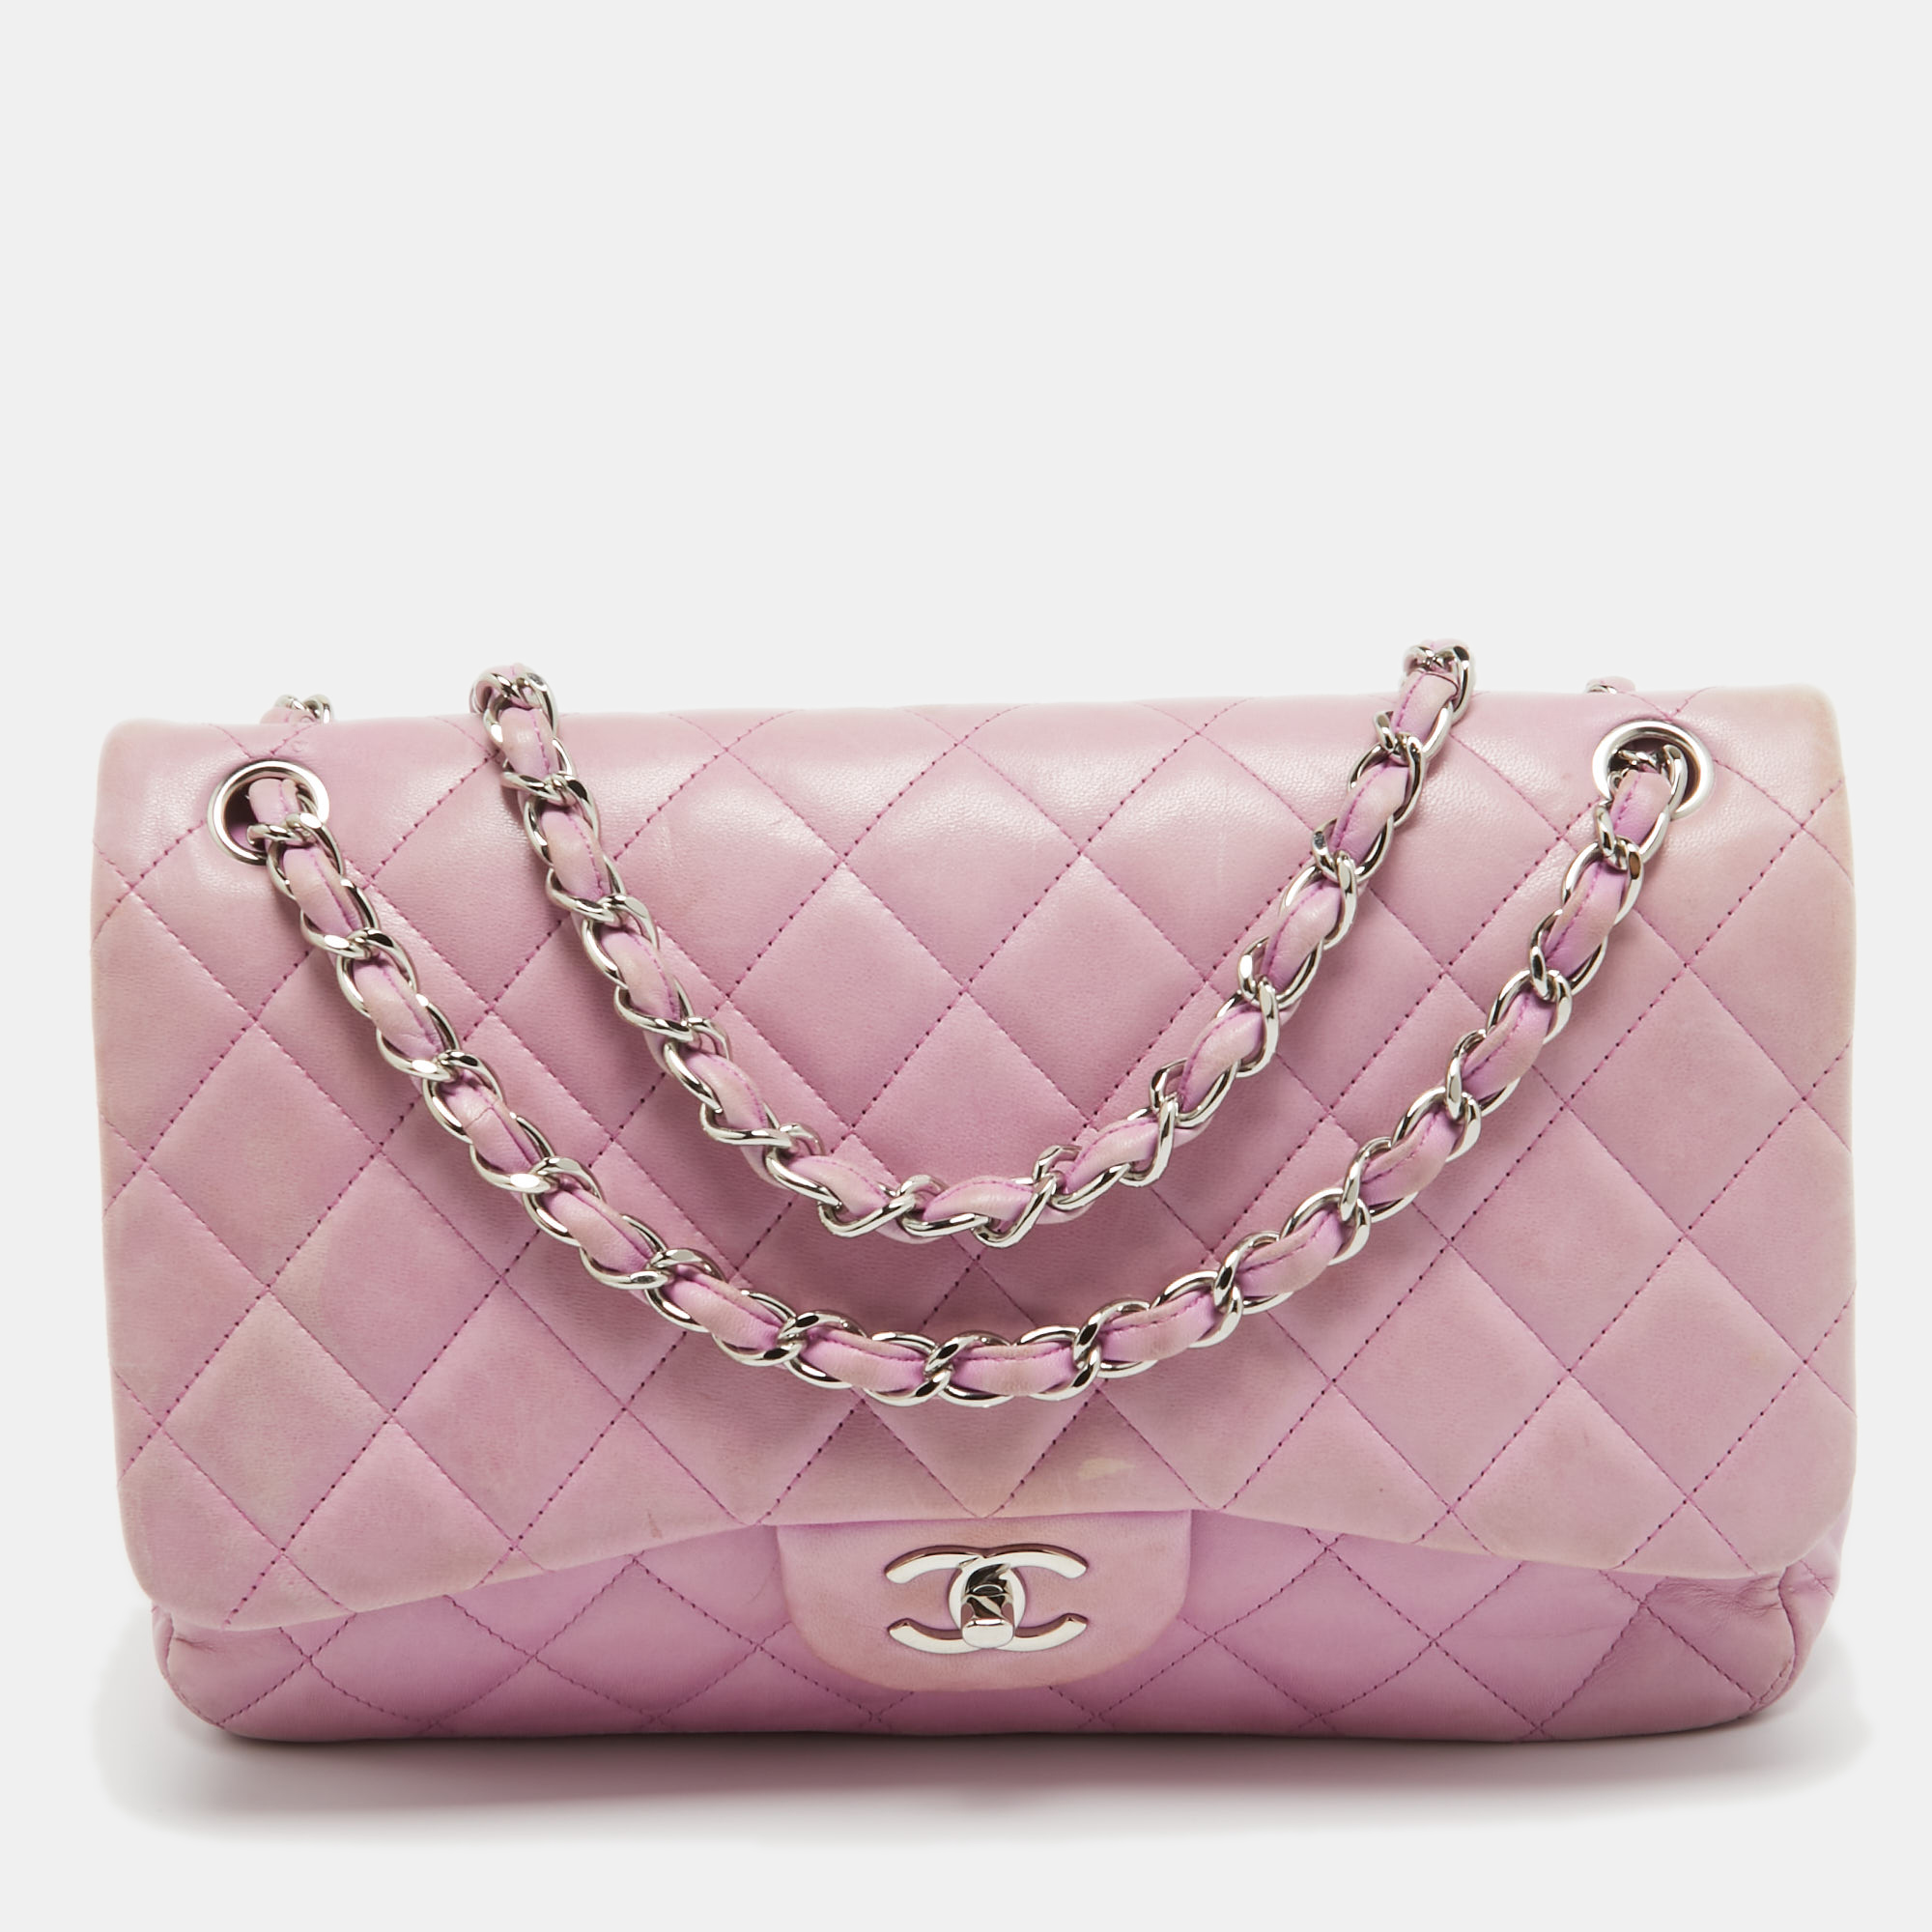 Chanel lilac quilted lambskin leather jumbo classic double flap bag